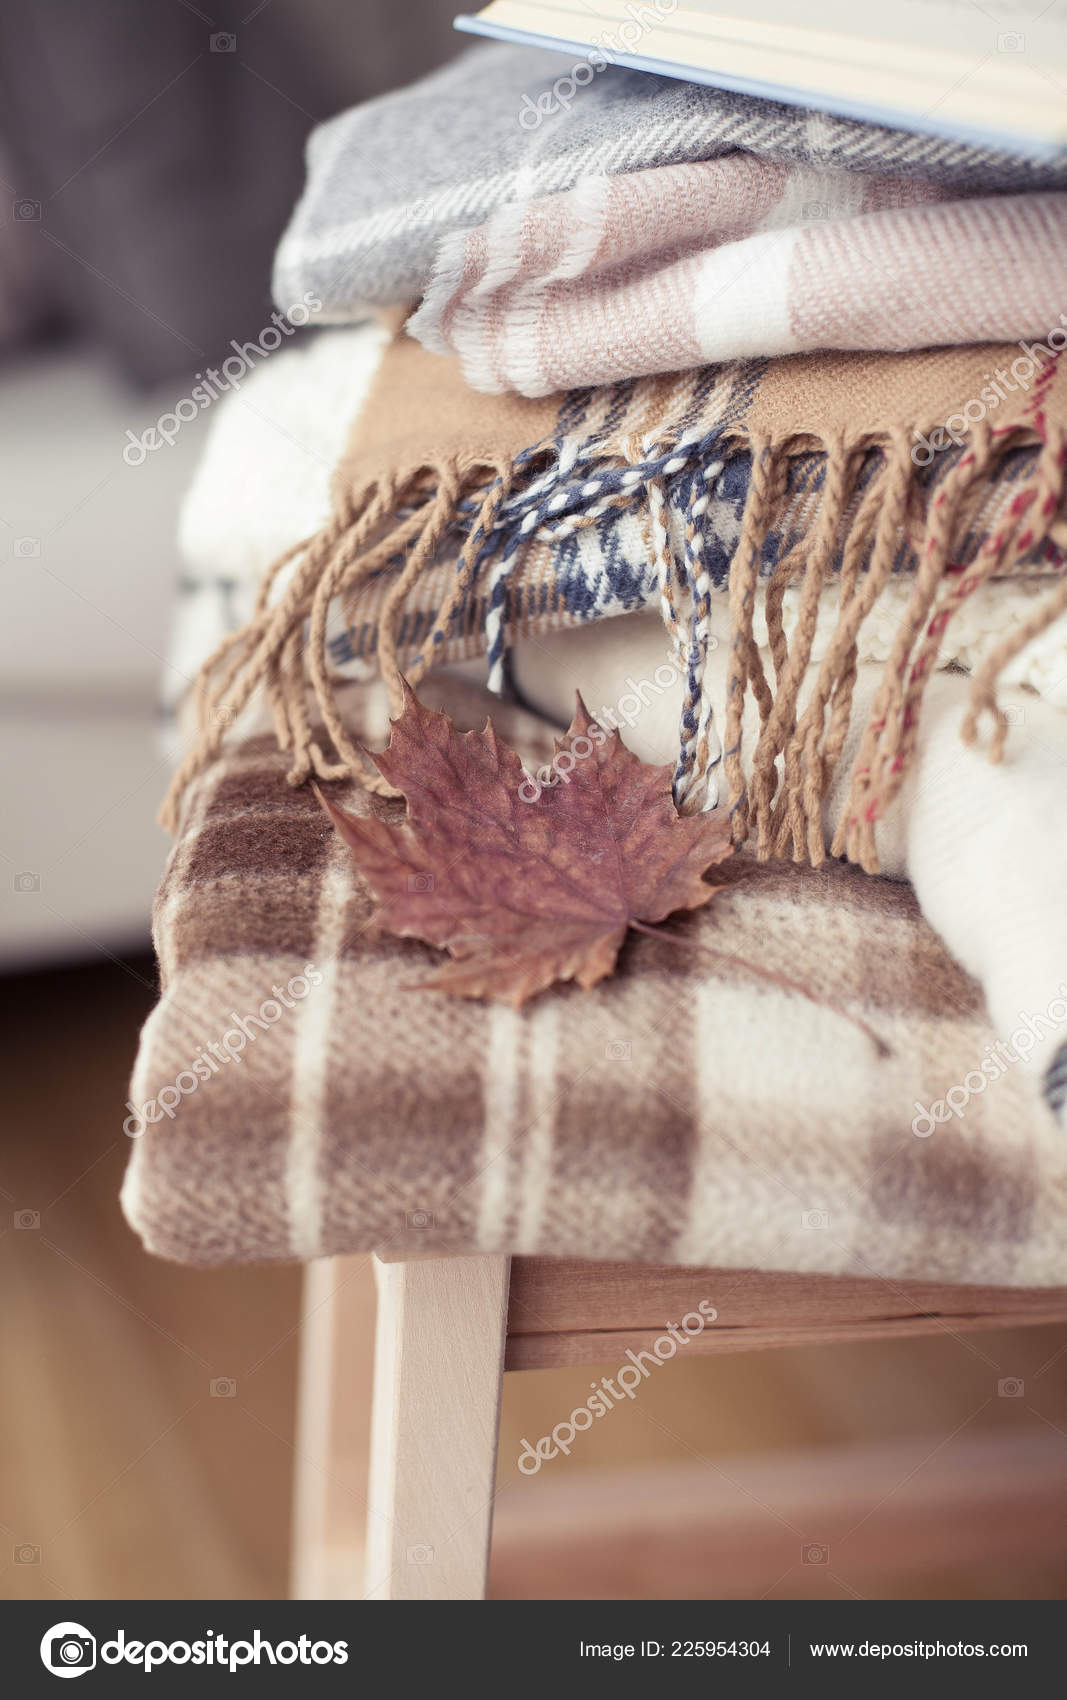 Blankets Close Up Autumn Cozy Interior A Stack Of Warm Blankets Lie On A Wooden Chair Autumn Winter Stock Photo